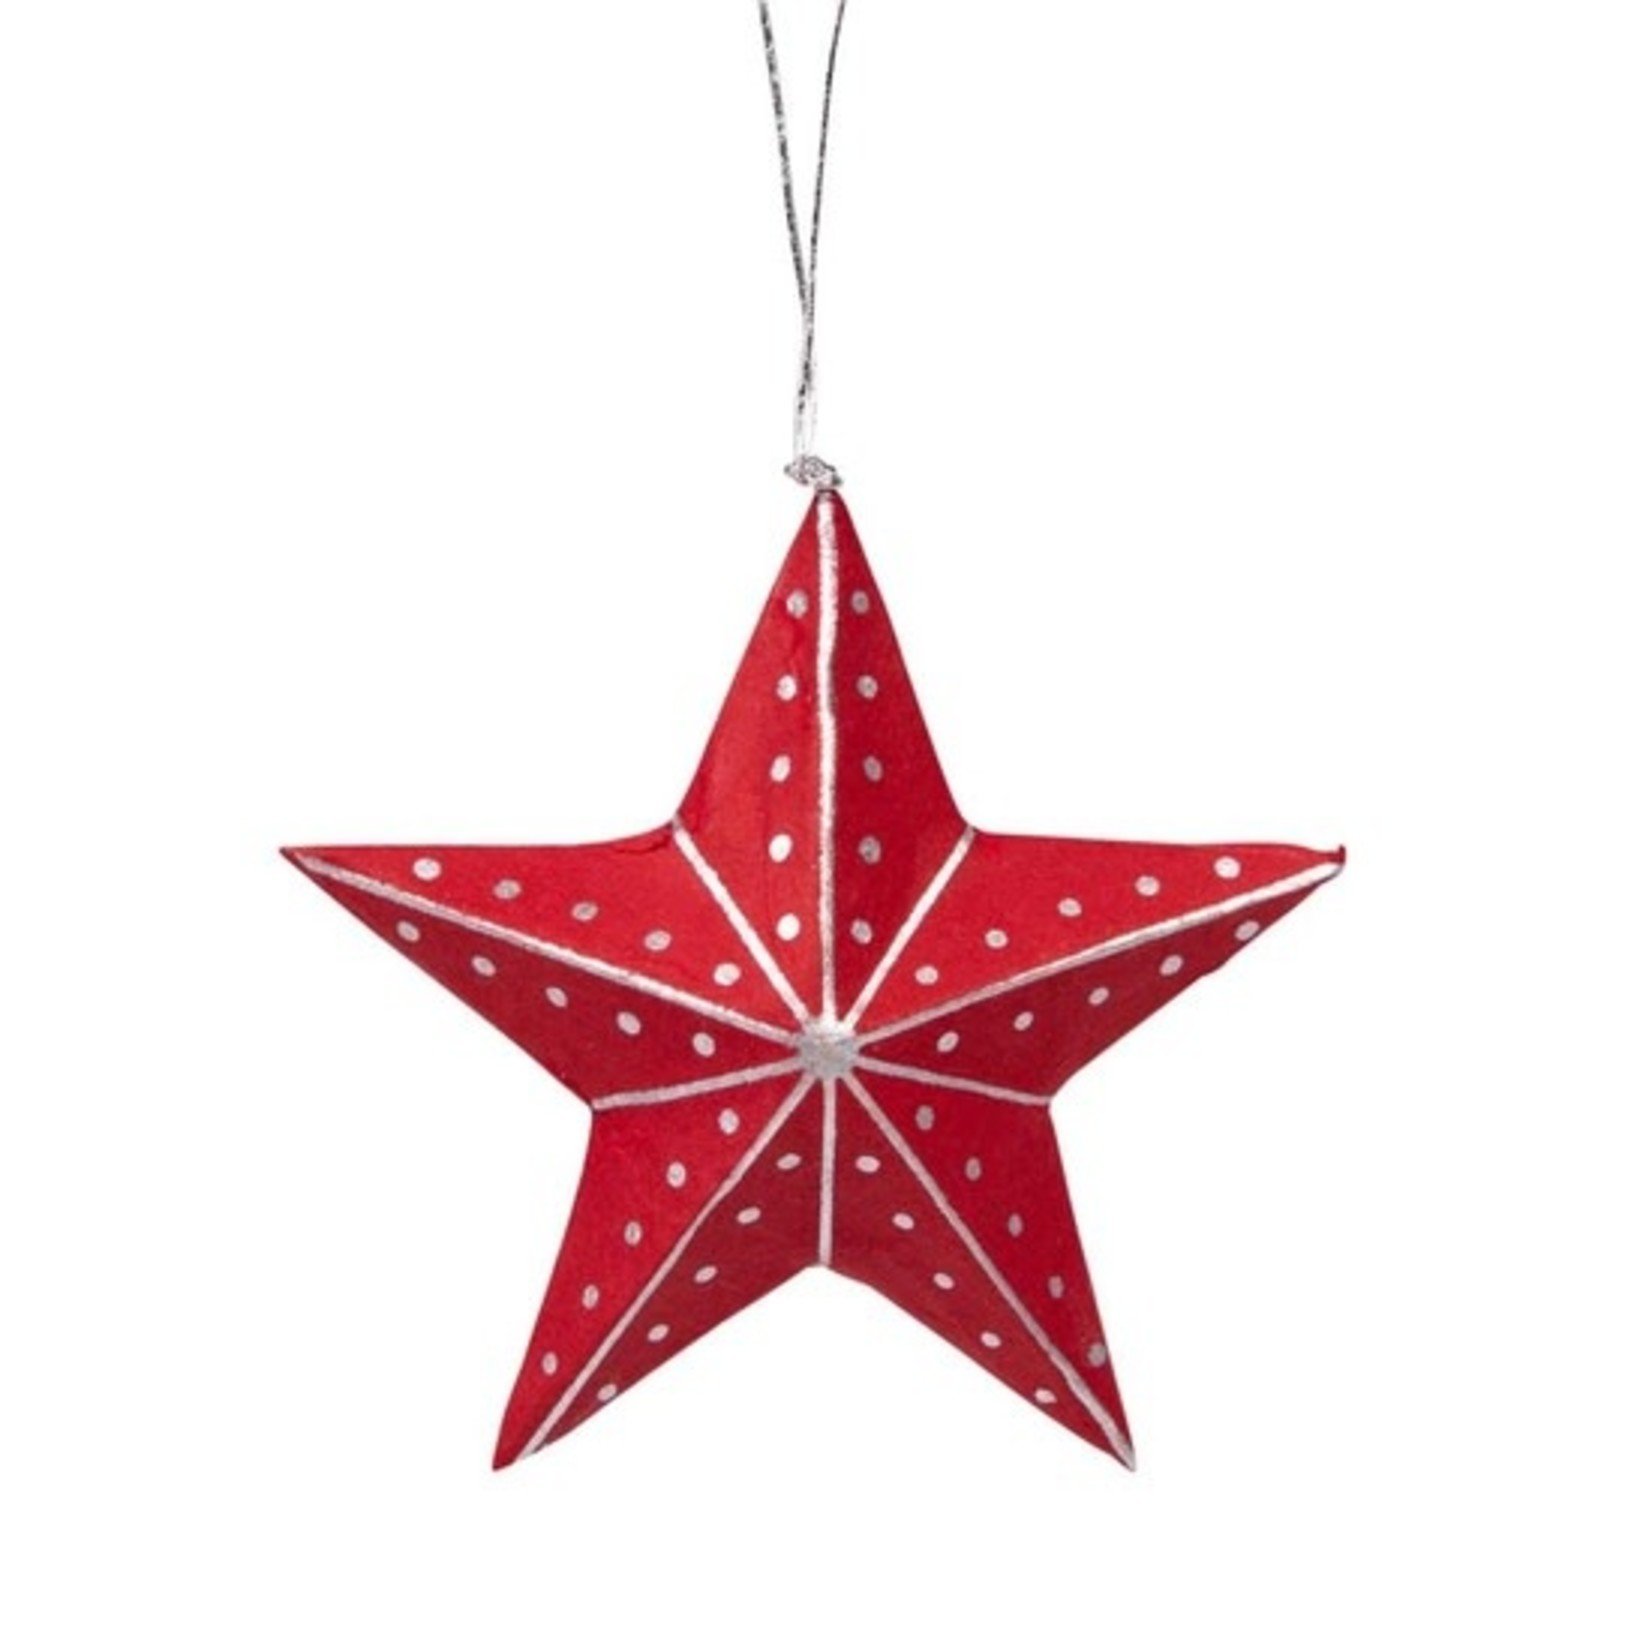 Ten Thousand Villages Silver And Red Star Ornament, Bangladesh